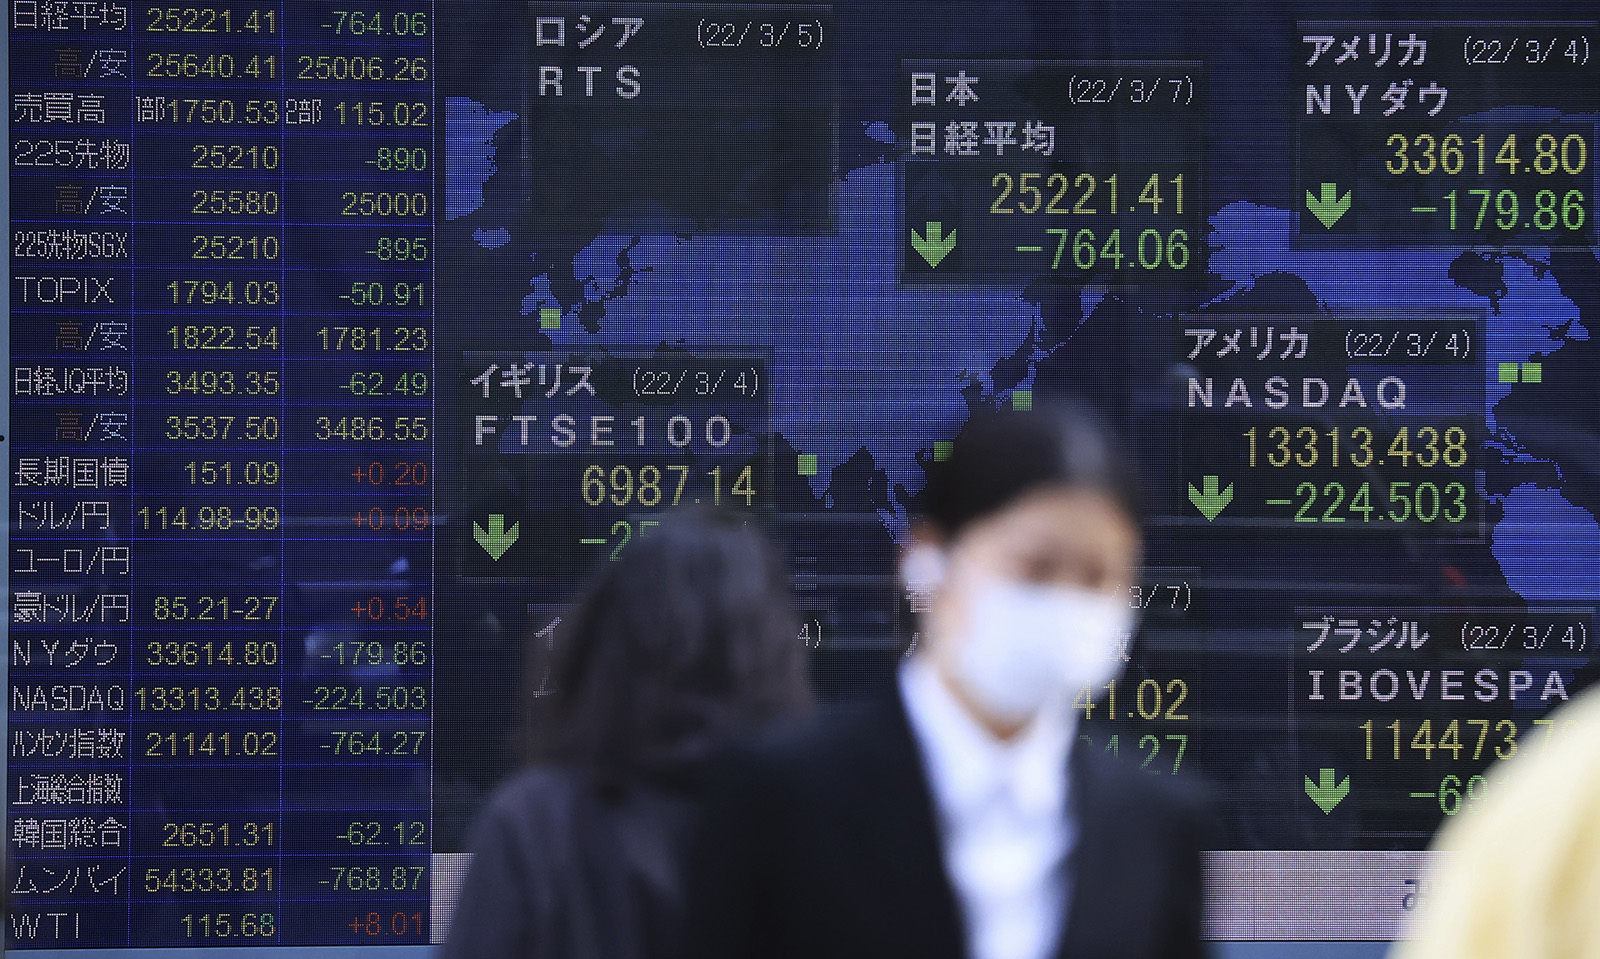 An electric board shows the world's stock market prices in Chiyoda Ward, Tokyo, on March 7.